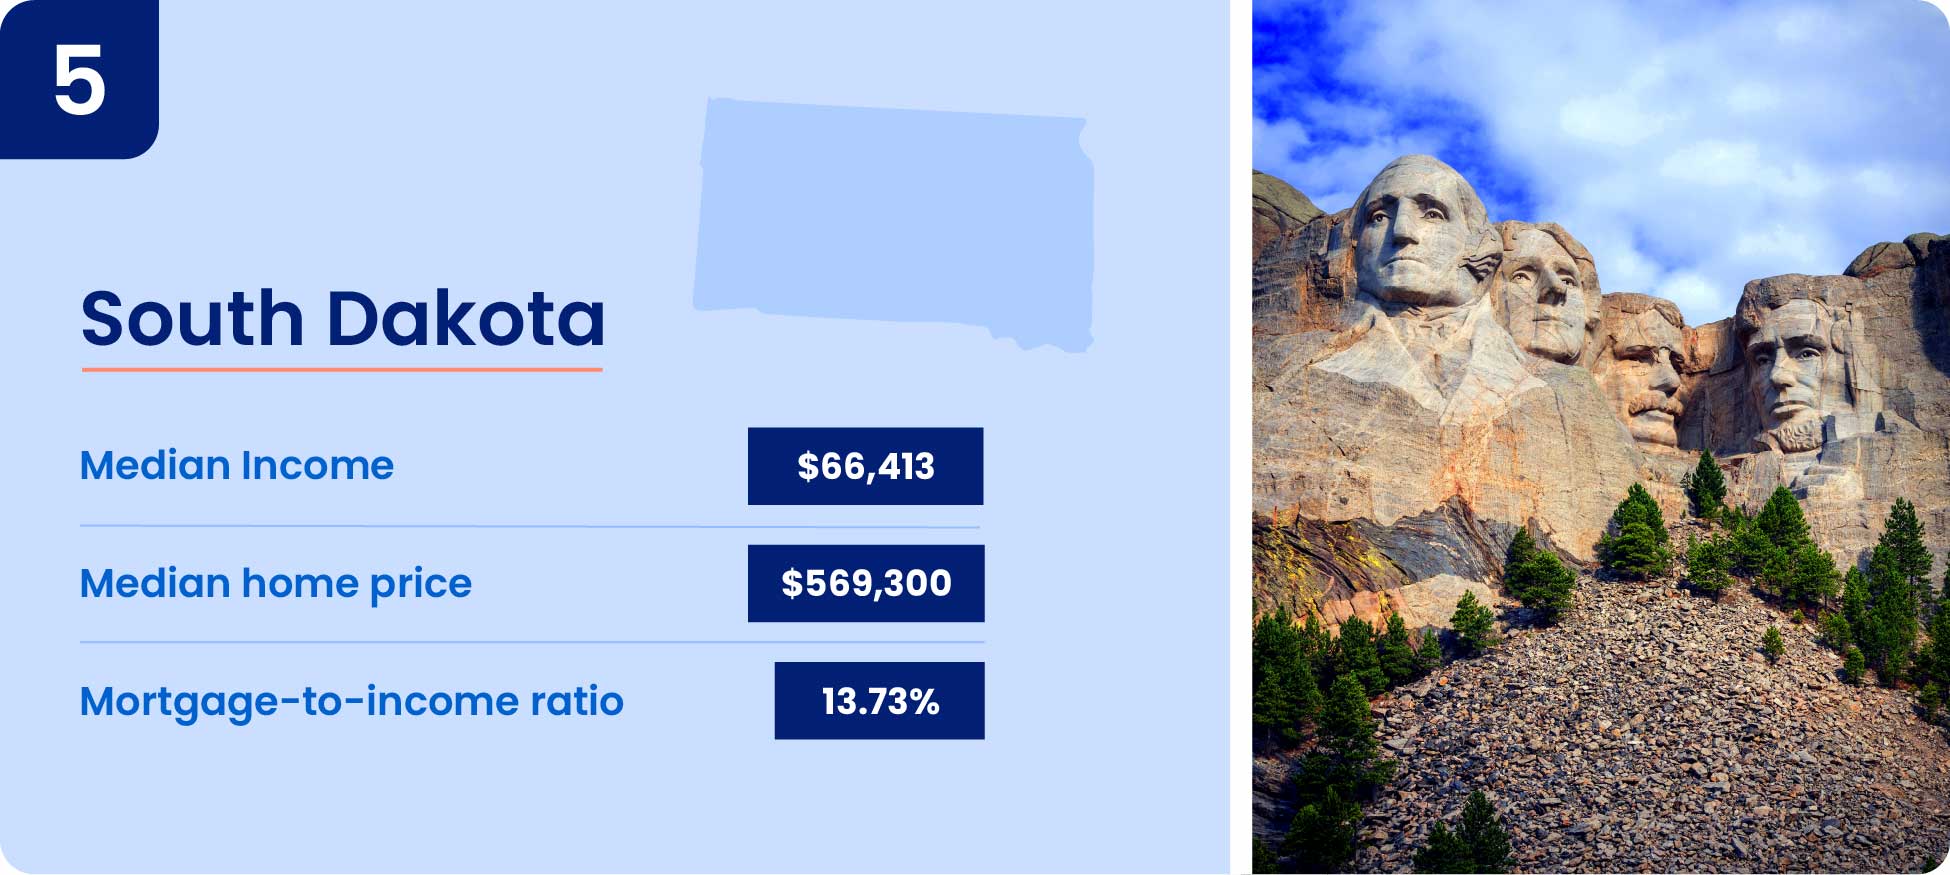 Image shows why one of the cheapest states to buy a house is South Dakota.